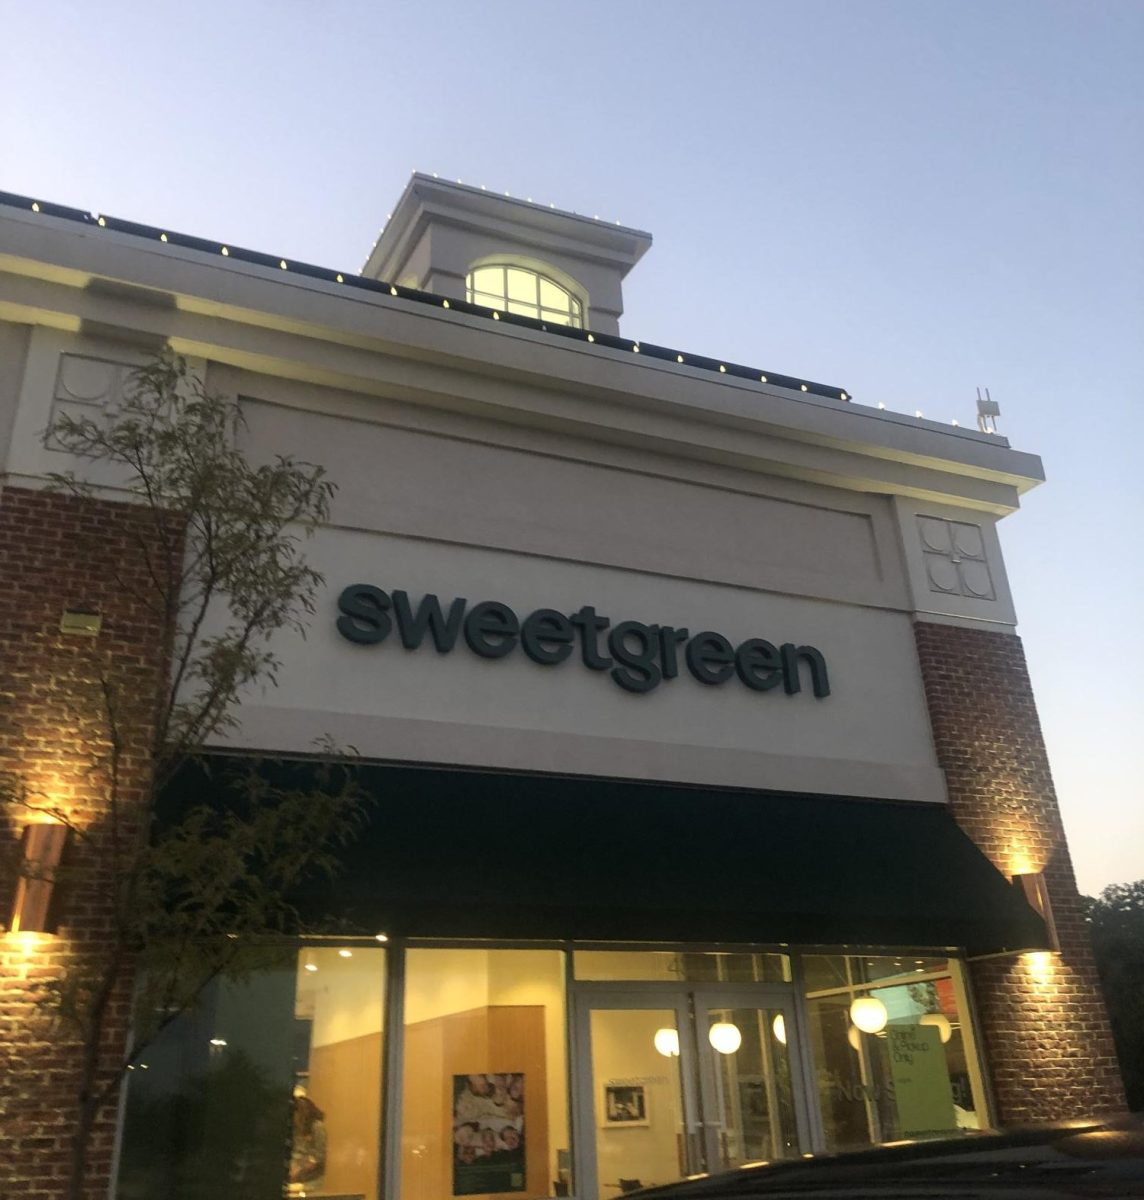 This past summer, Sweetgreen opened its doors in their new location in Deer Park. Sweetgreen is known for their varieties of delicious salads.